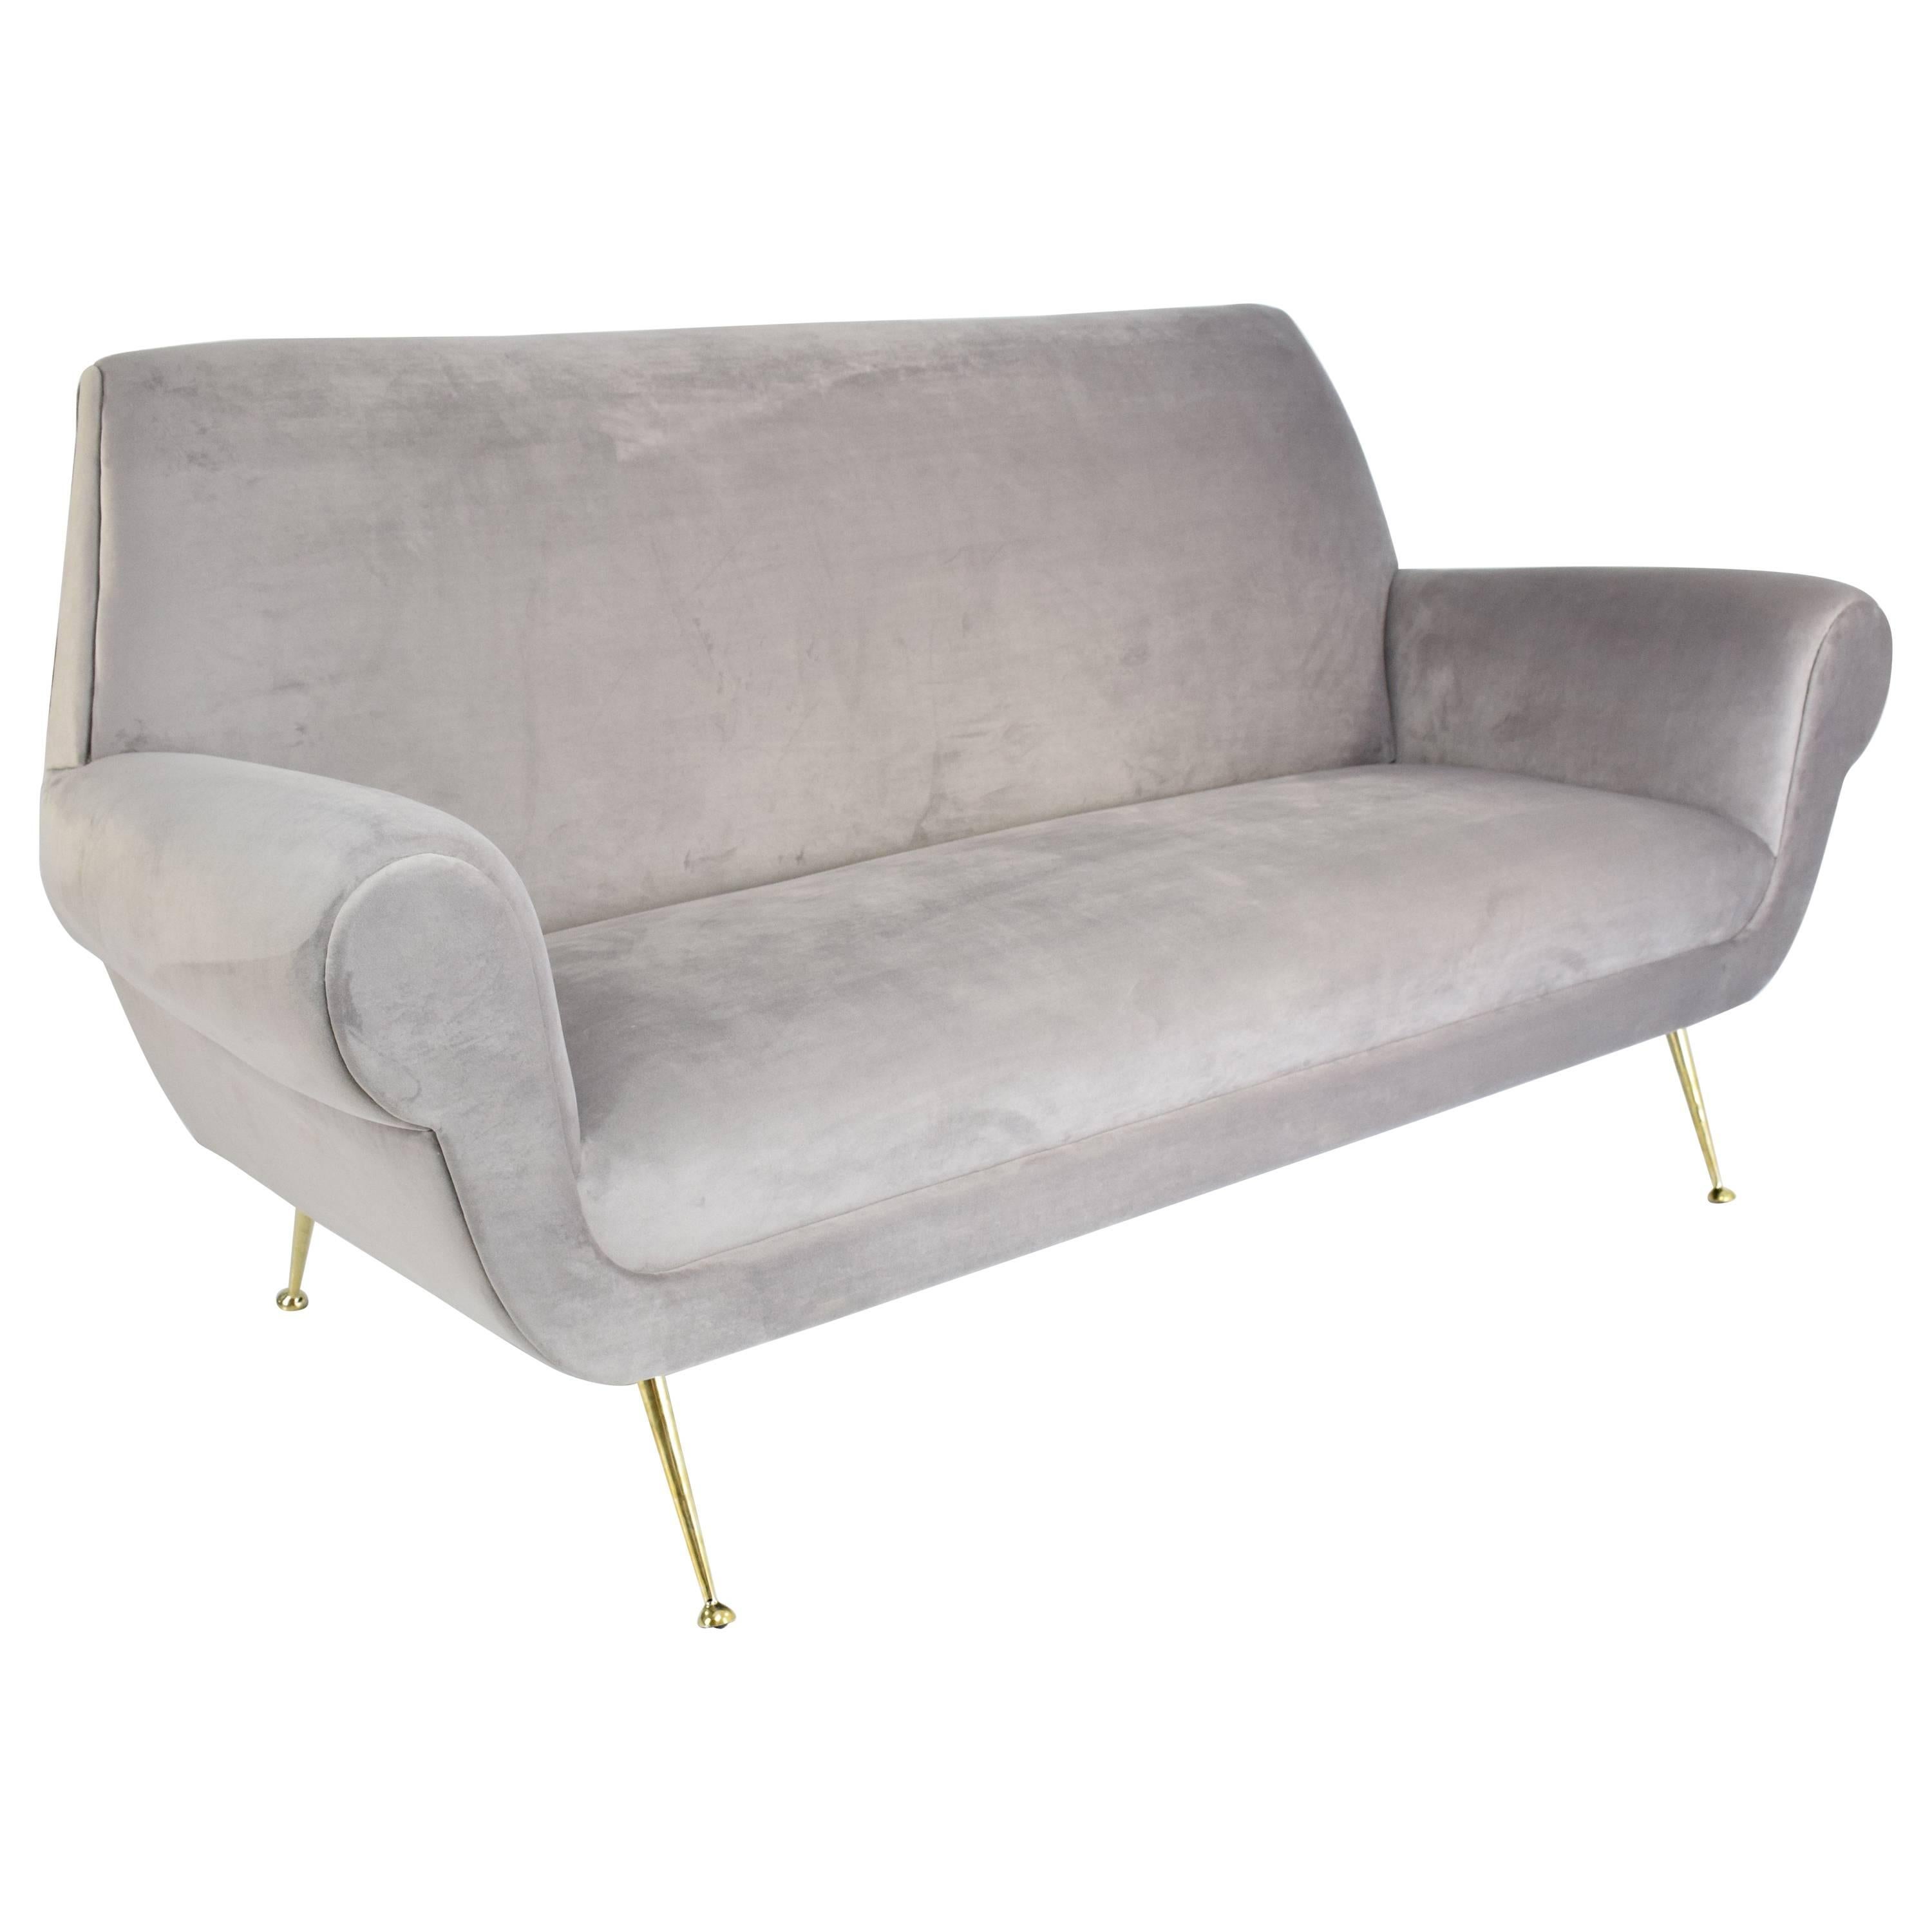 An elegant vintage sofa by Italian midcentury designer Gigi Radice for Minotti expertly restored and reupholstered in soft grey velvet fabric, sitting on splayed and tapered gold polished brass legs with a delicate curved elevated seating effect and